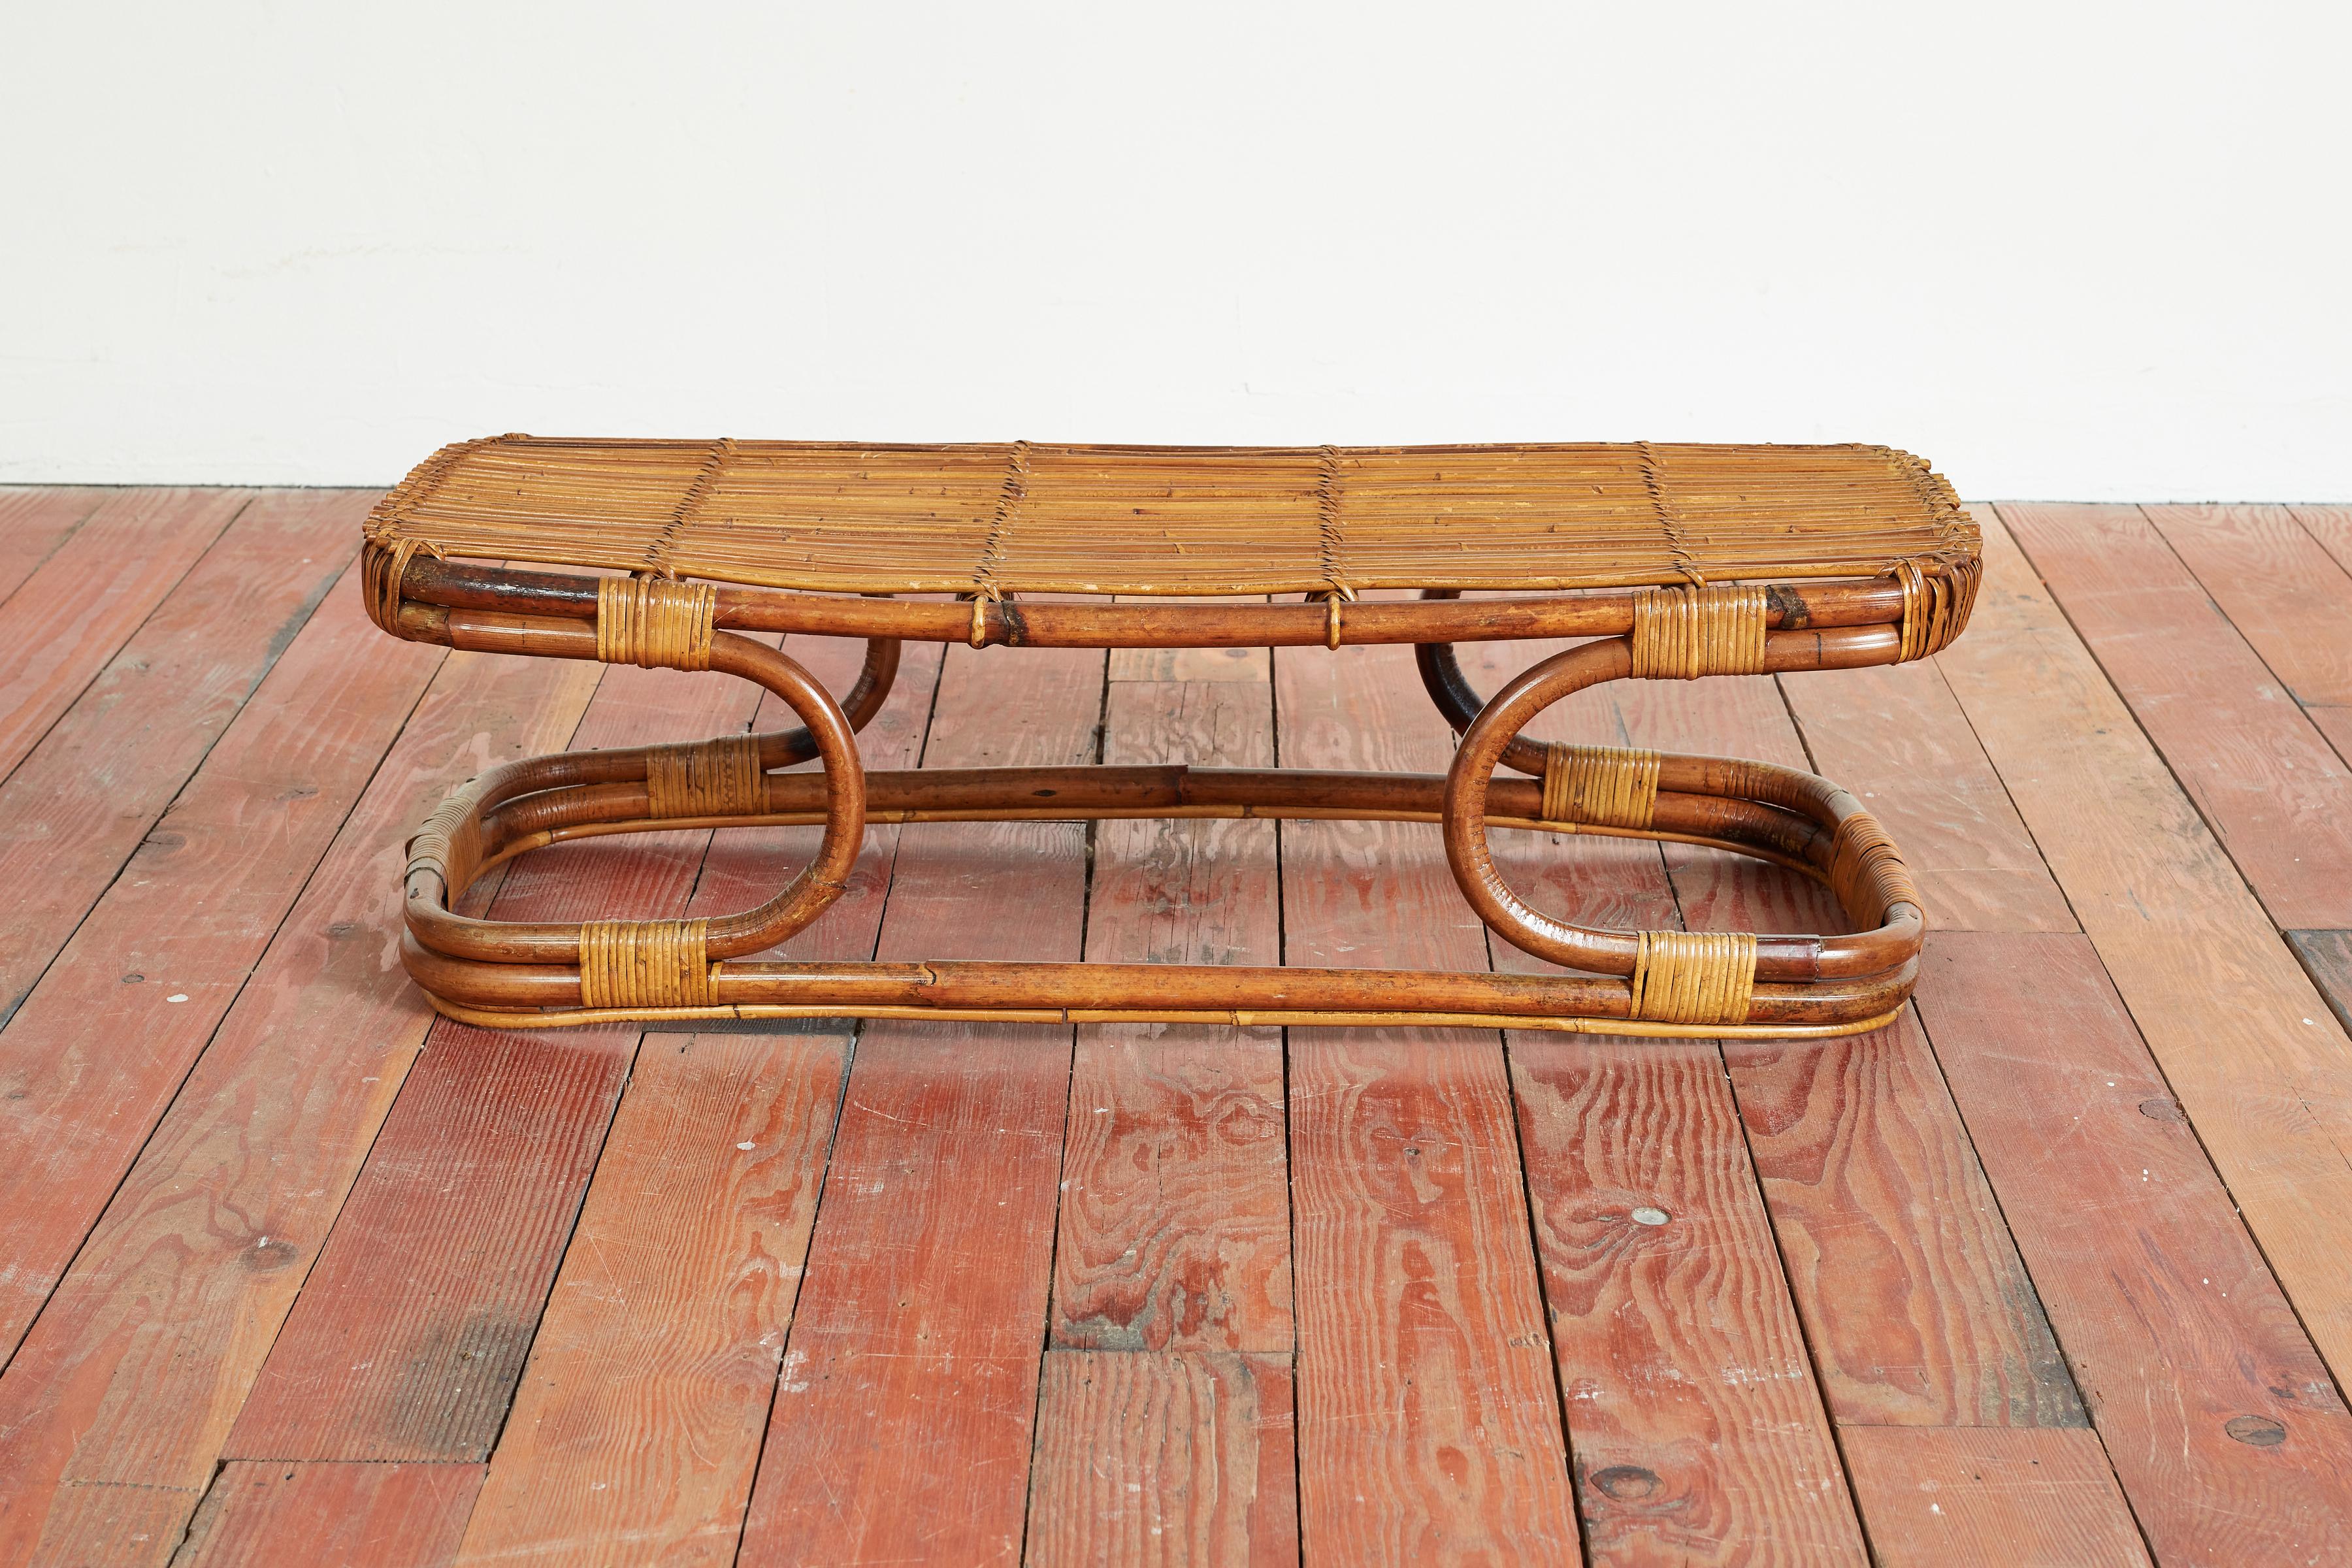 Simple bamboo table attributed to Tito Agnoli - Italy, 1950s
Bench rectangular shape with curved base.